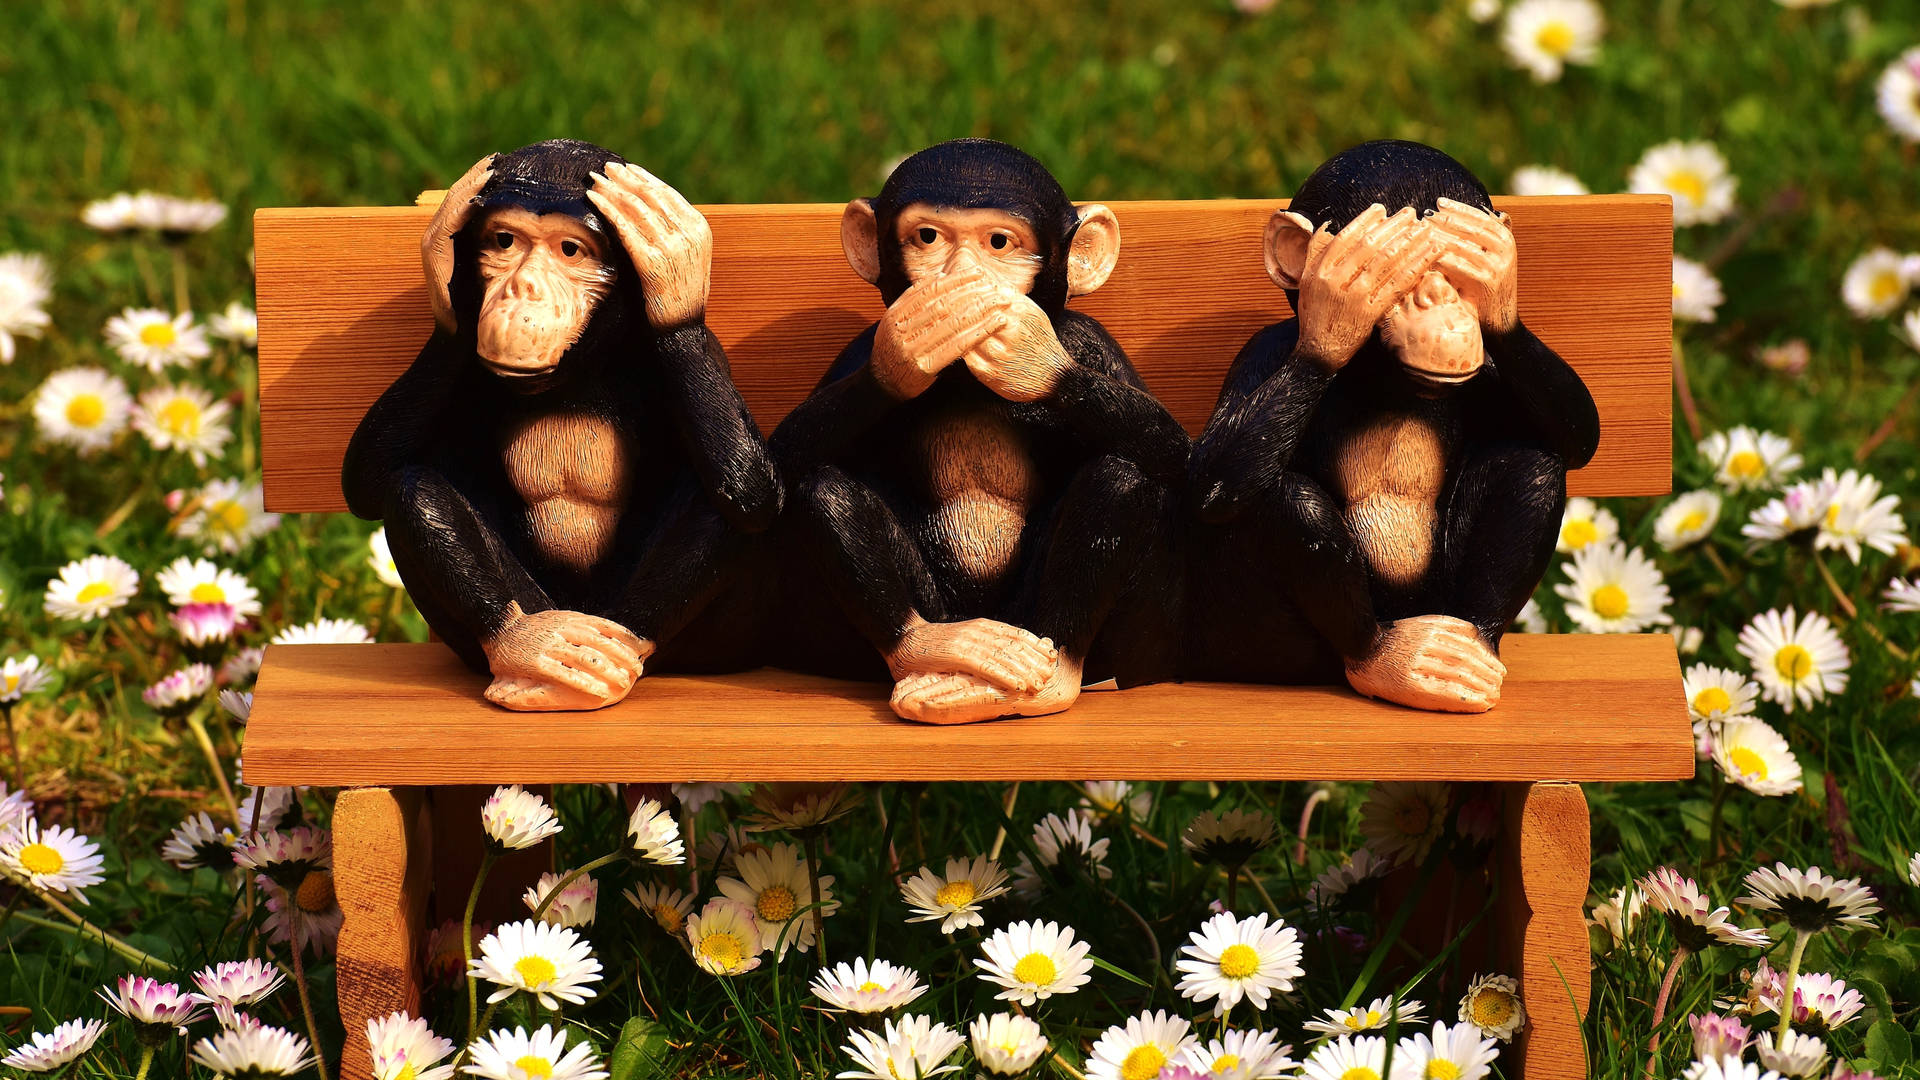 Wooden Chimpanzees At Bench Near Flowers Background